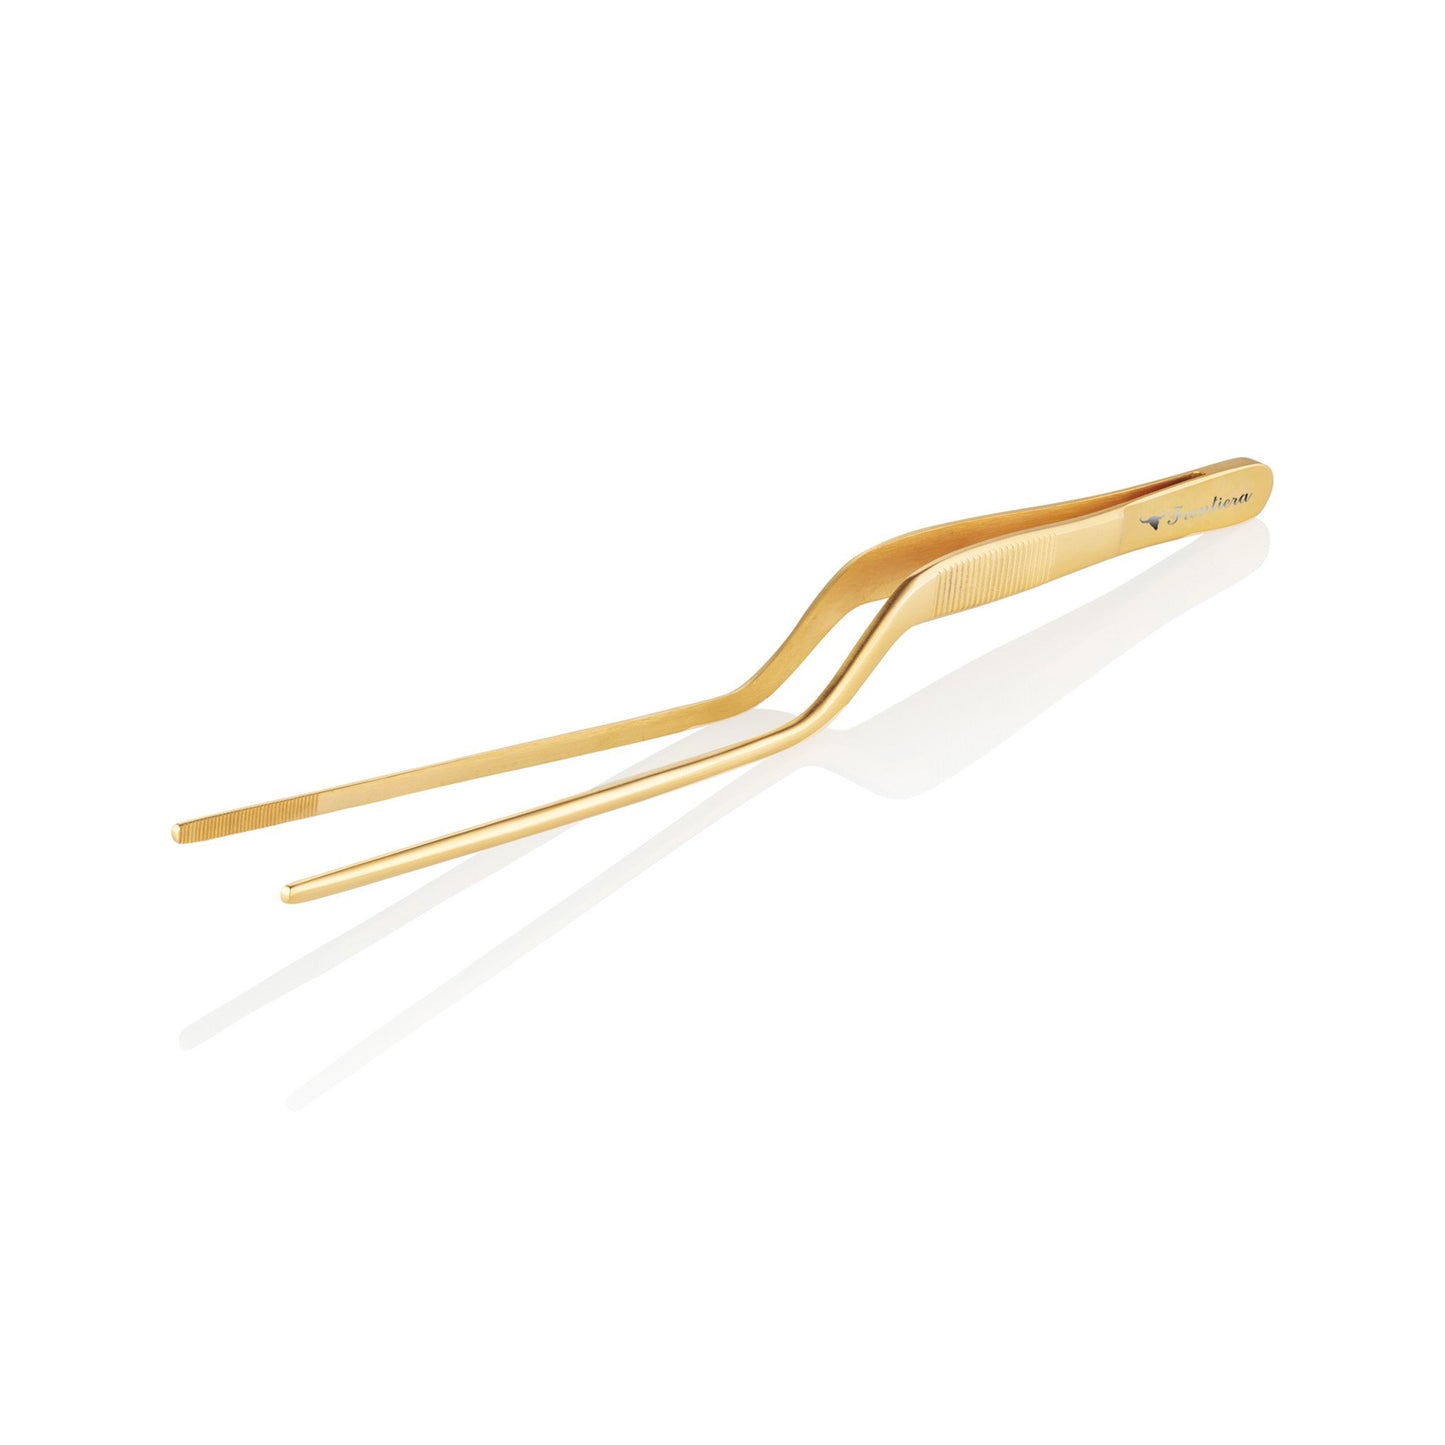 High Precision Offset Chef's Tweezers (20cm/7.87") Gold + Custome Engraving (Optional)